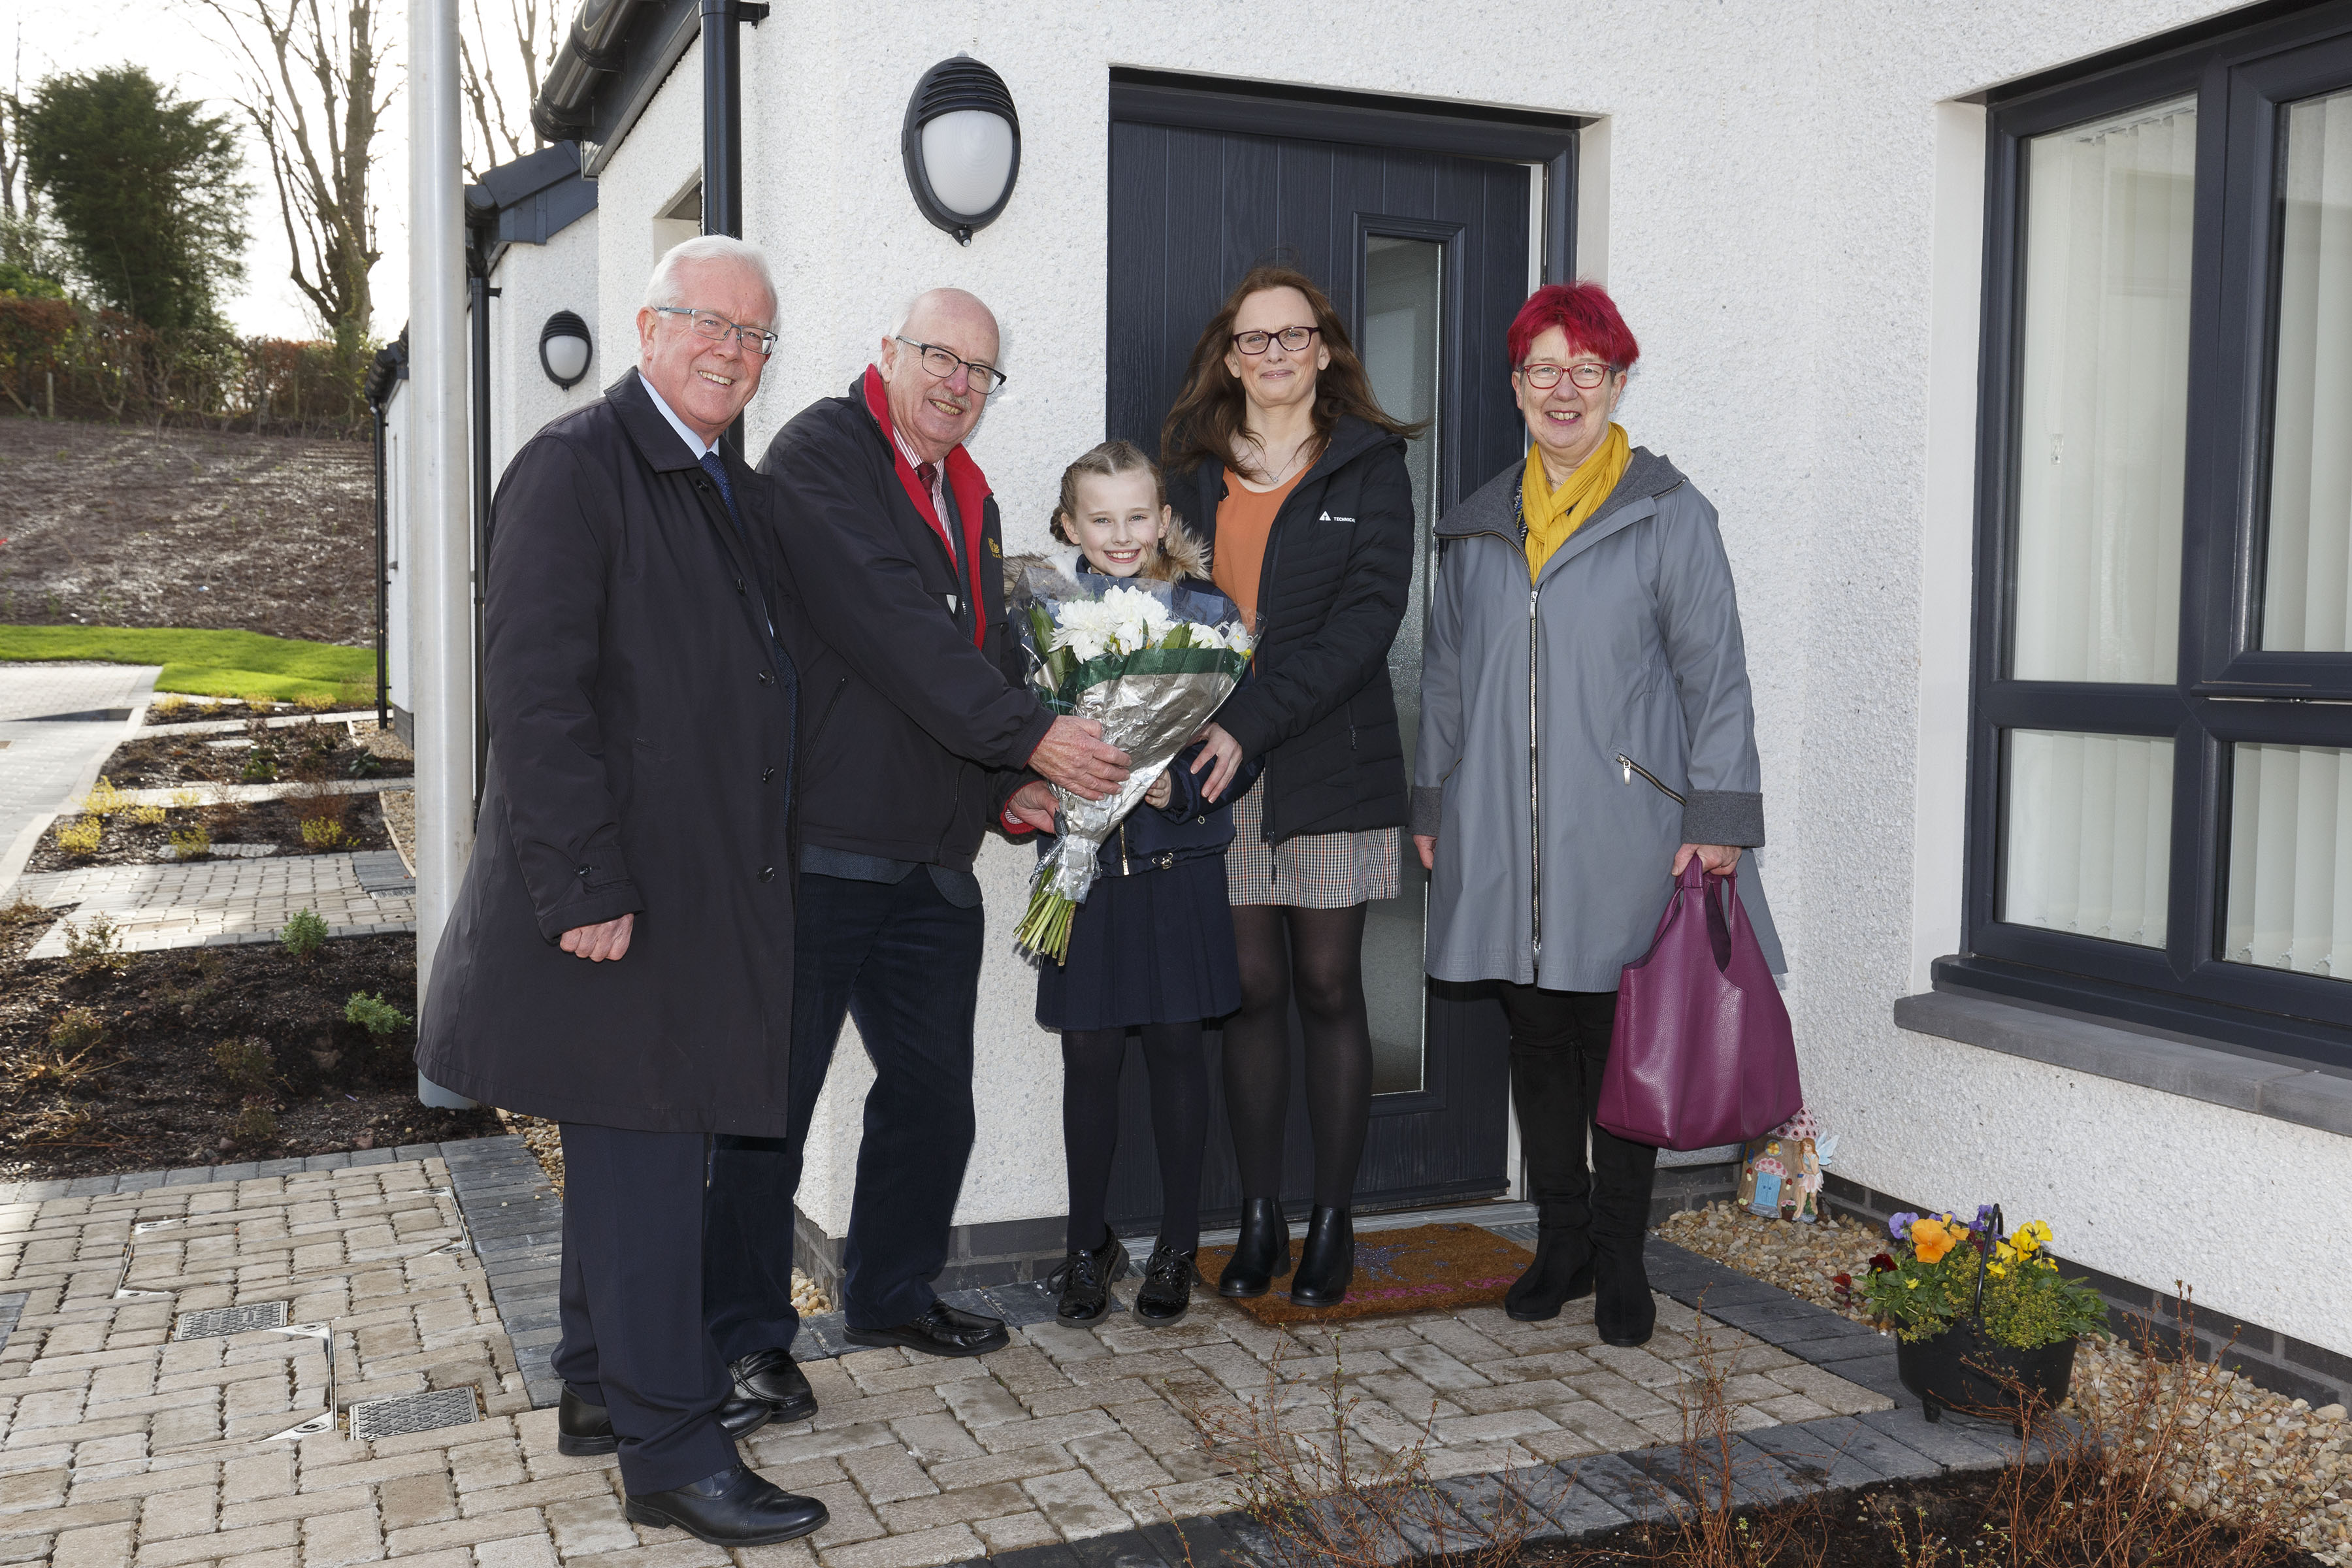 Tenants make move into new Rural Stirling affordable homes